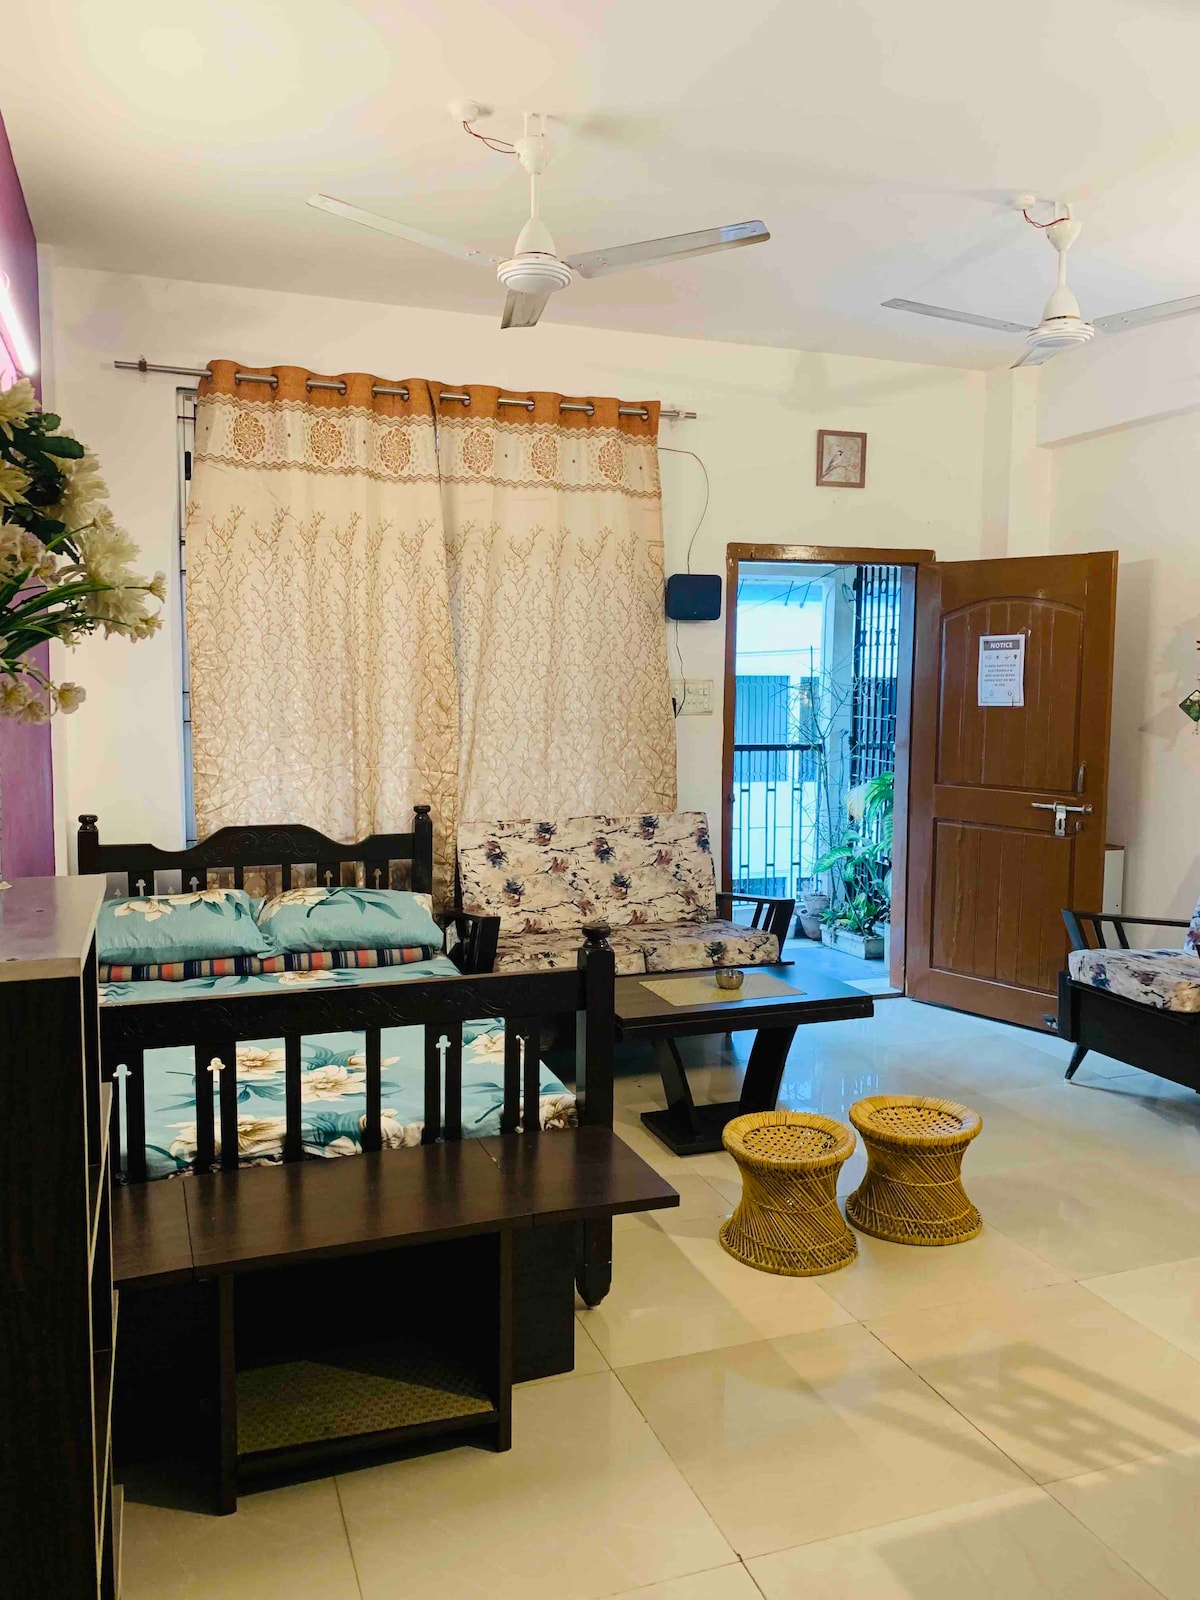 Raga Homestay 2BHK- A homely guesthouse experience